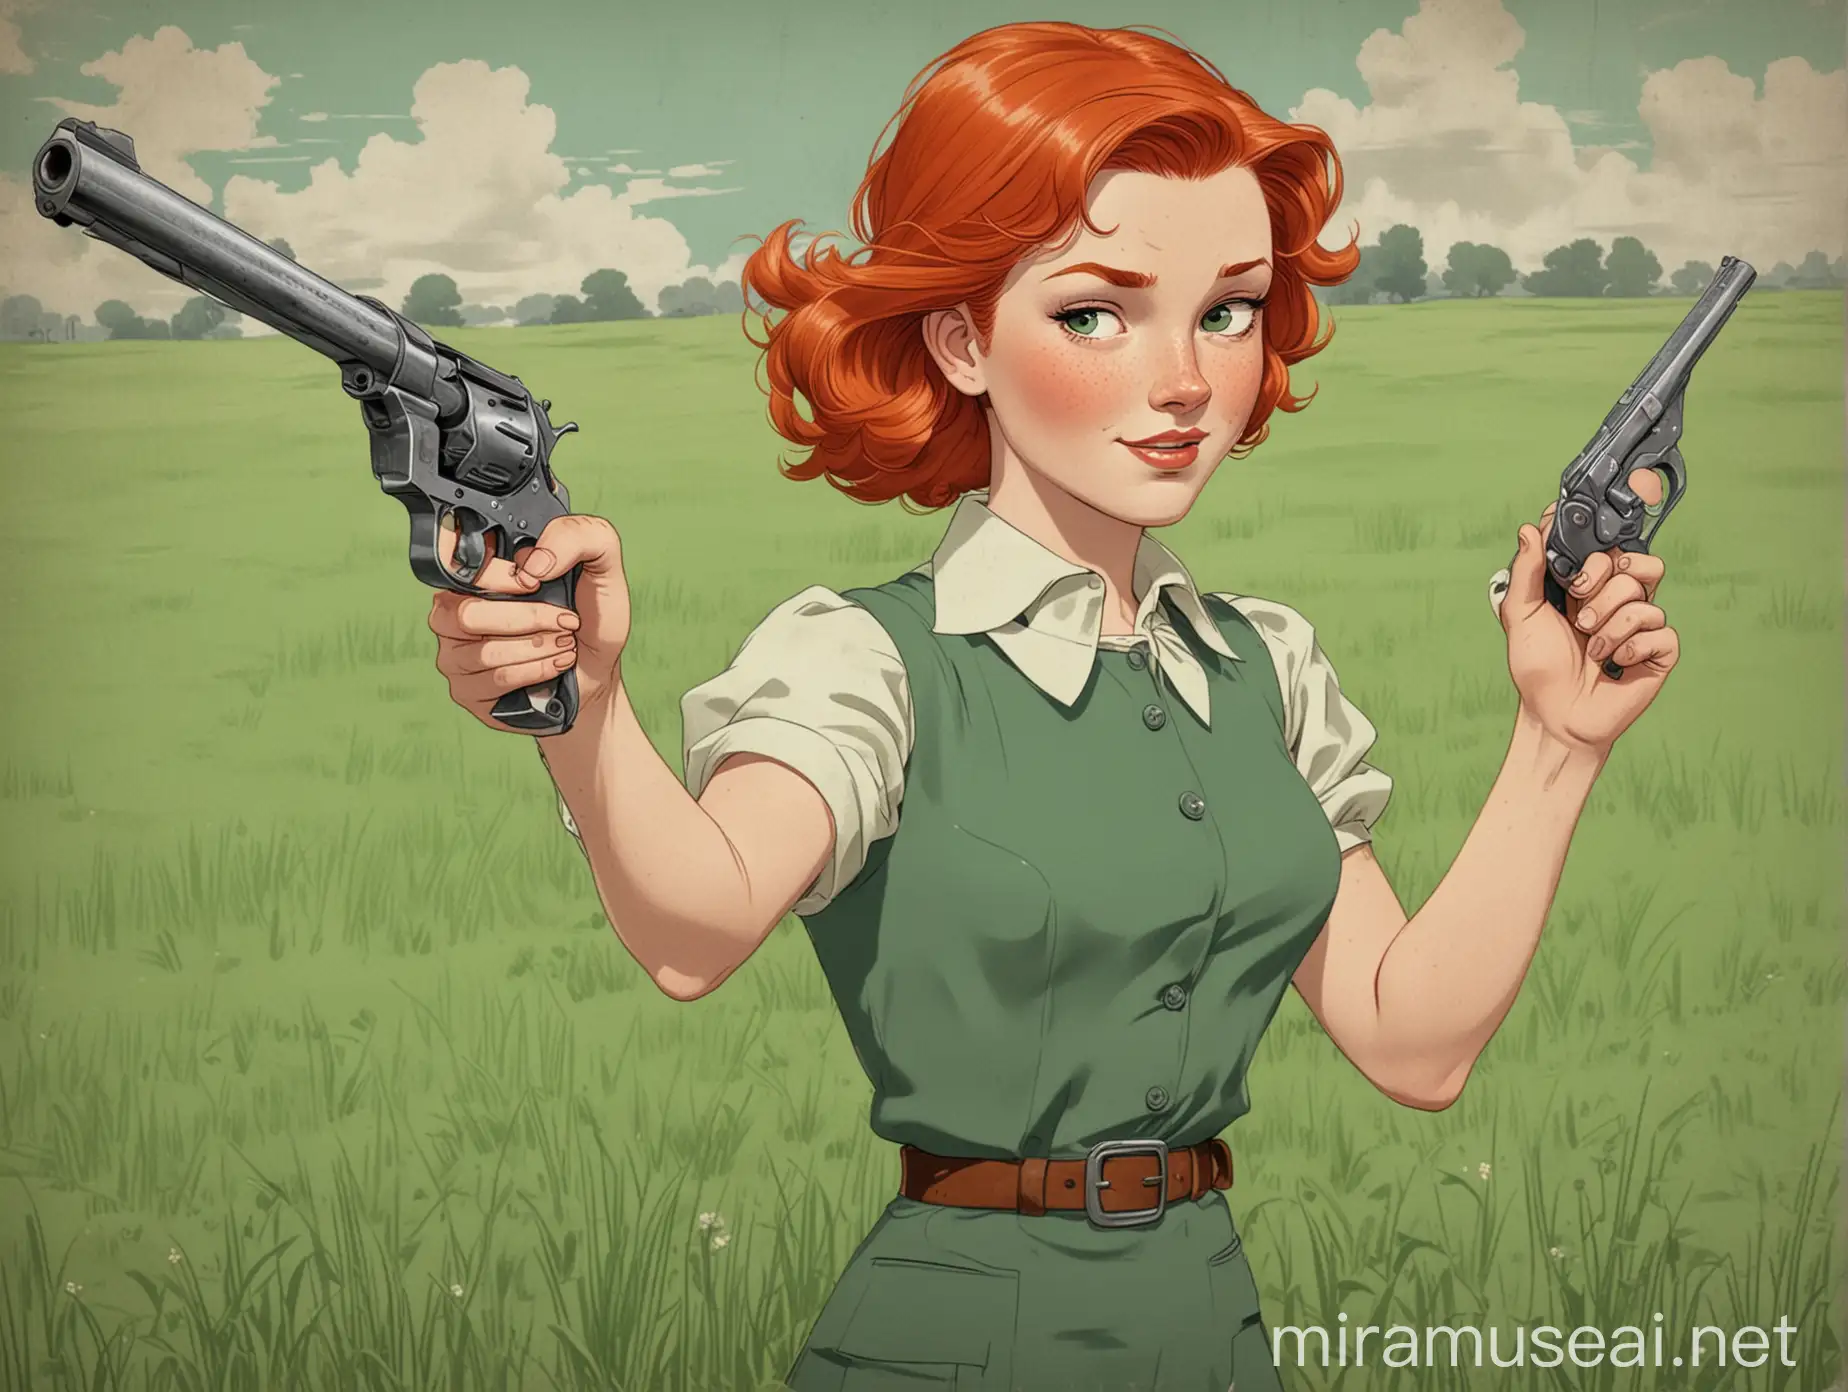 RedHaired Woman with Pistol in 1930s Cartoon Setting